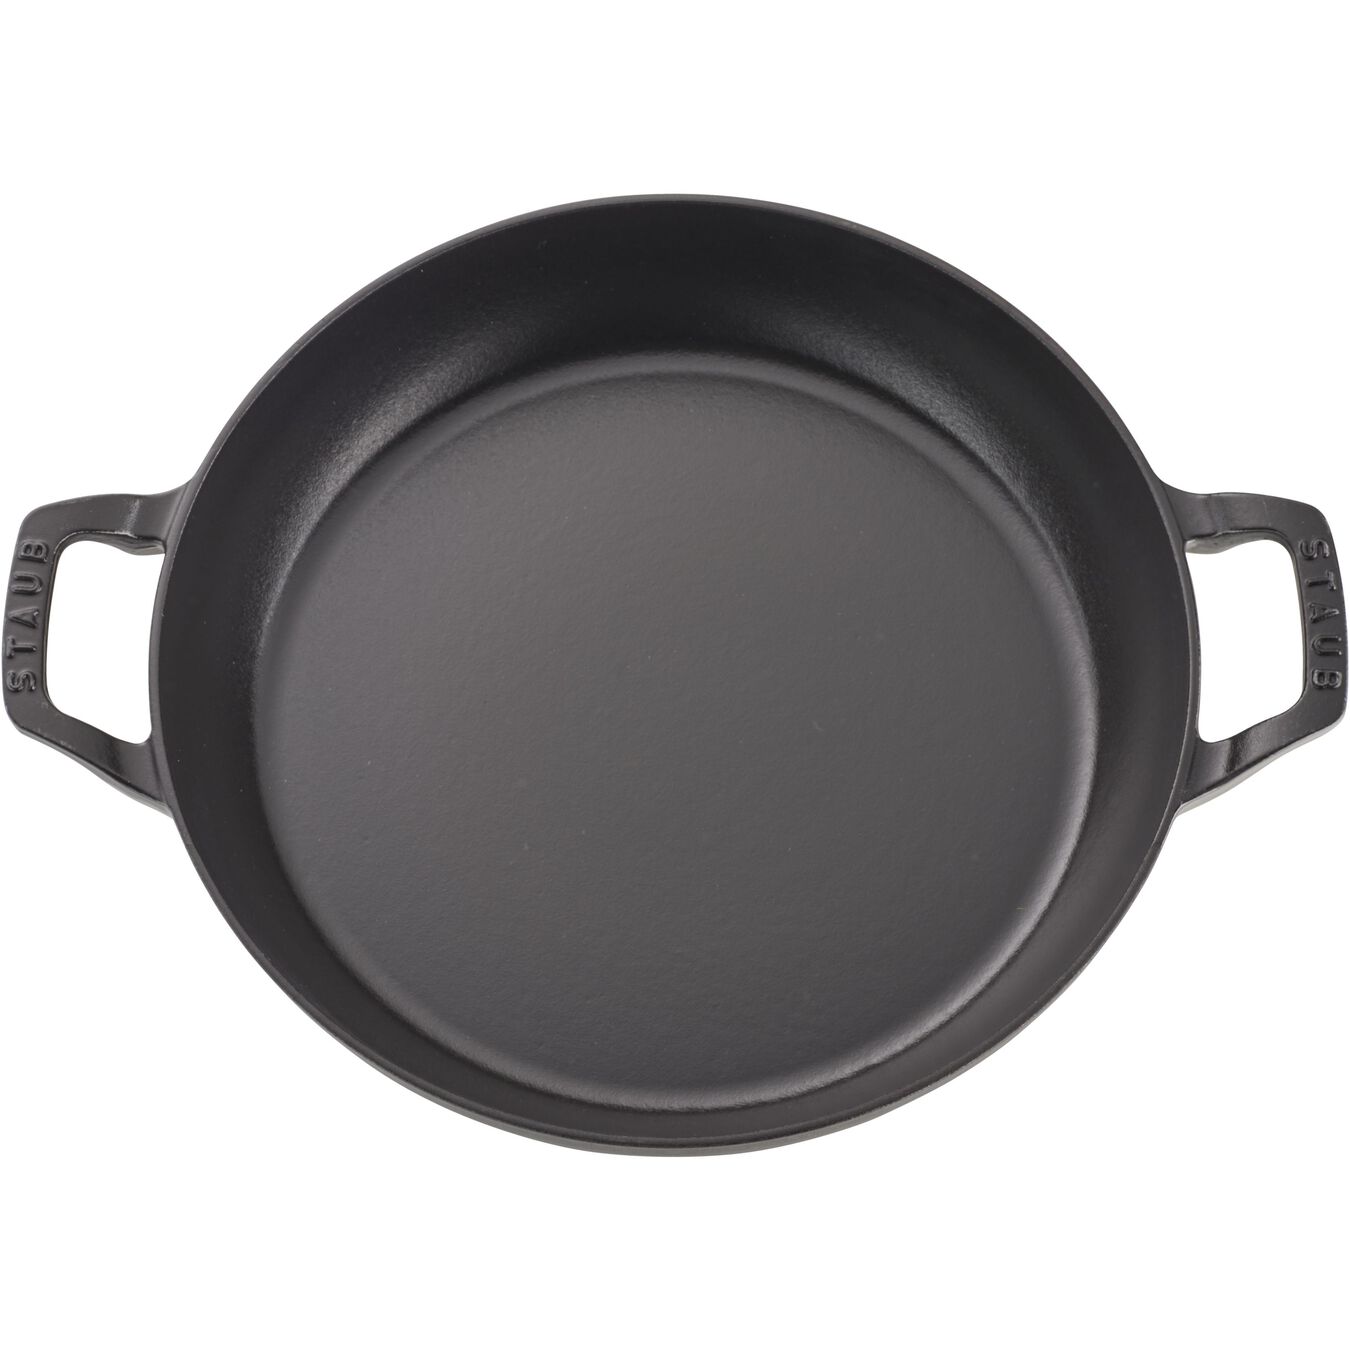 3.5 l cast iron round Saute pan with glass lid, black - Visual Imperfections,,large 3